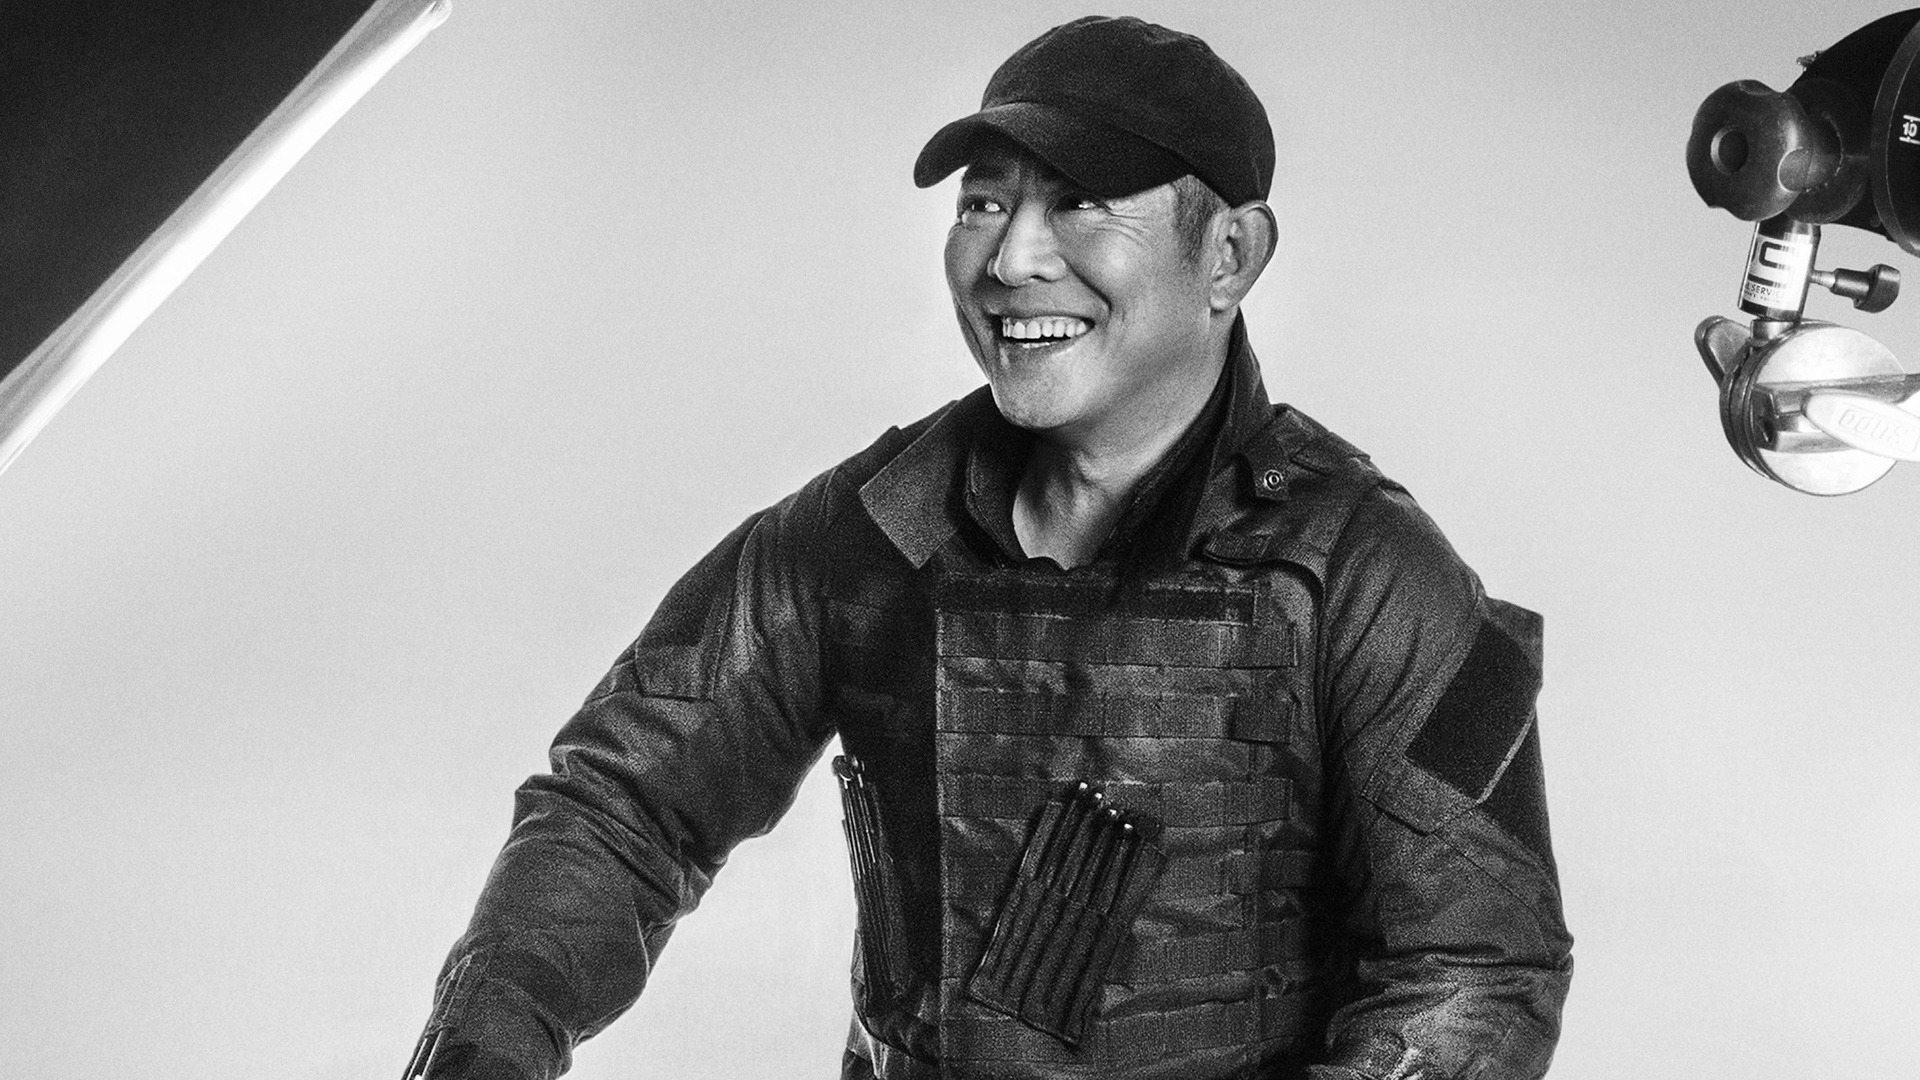 Jet Li The Expendables 3 for 1920 x 1080 HDTV 1080p resolution